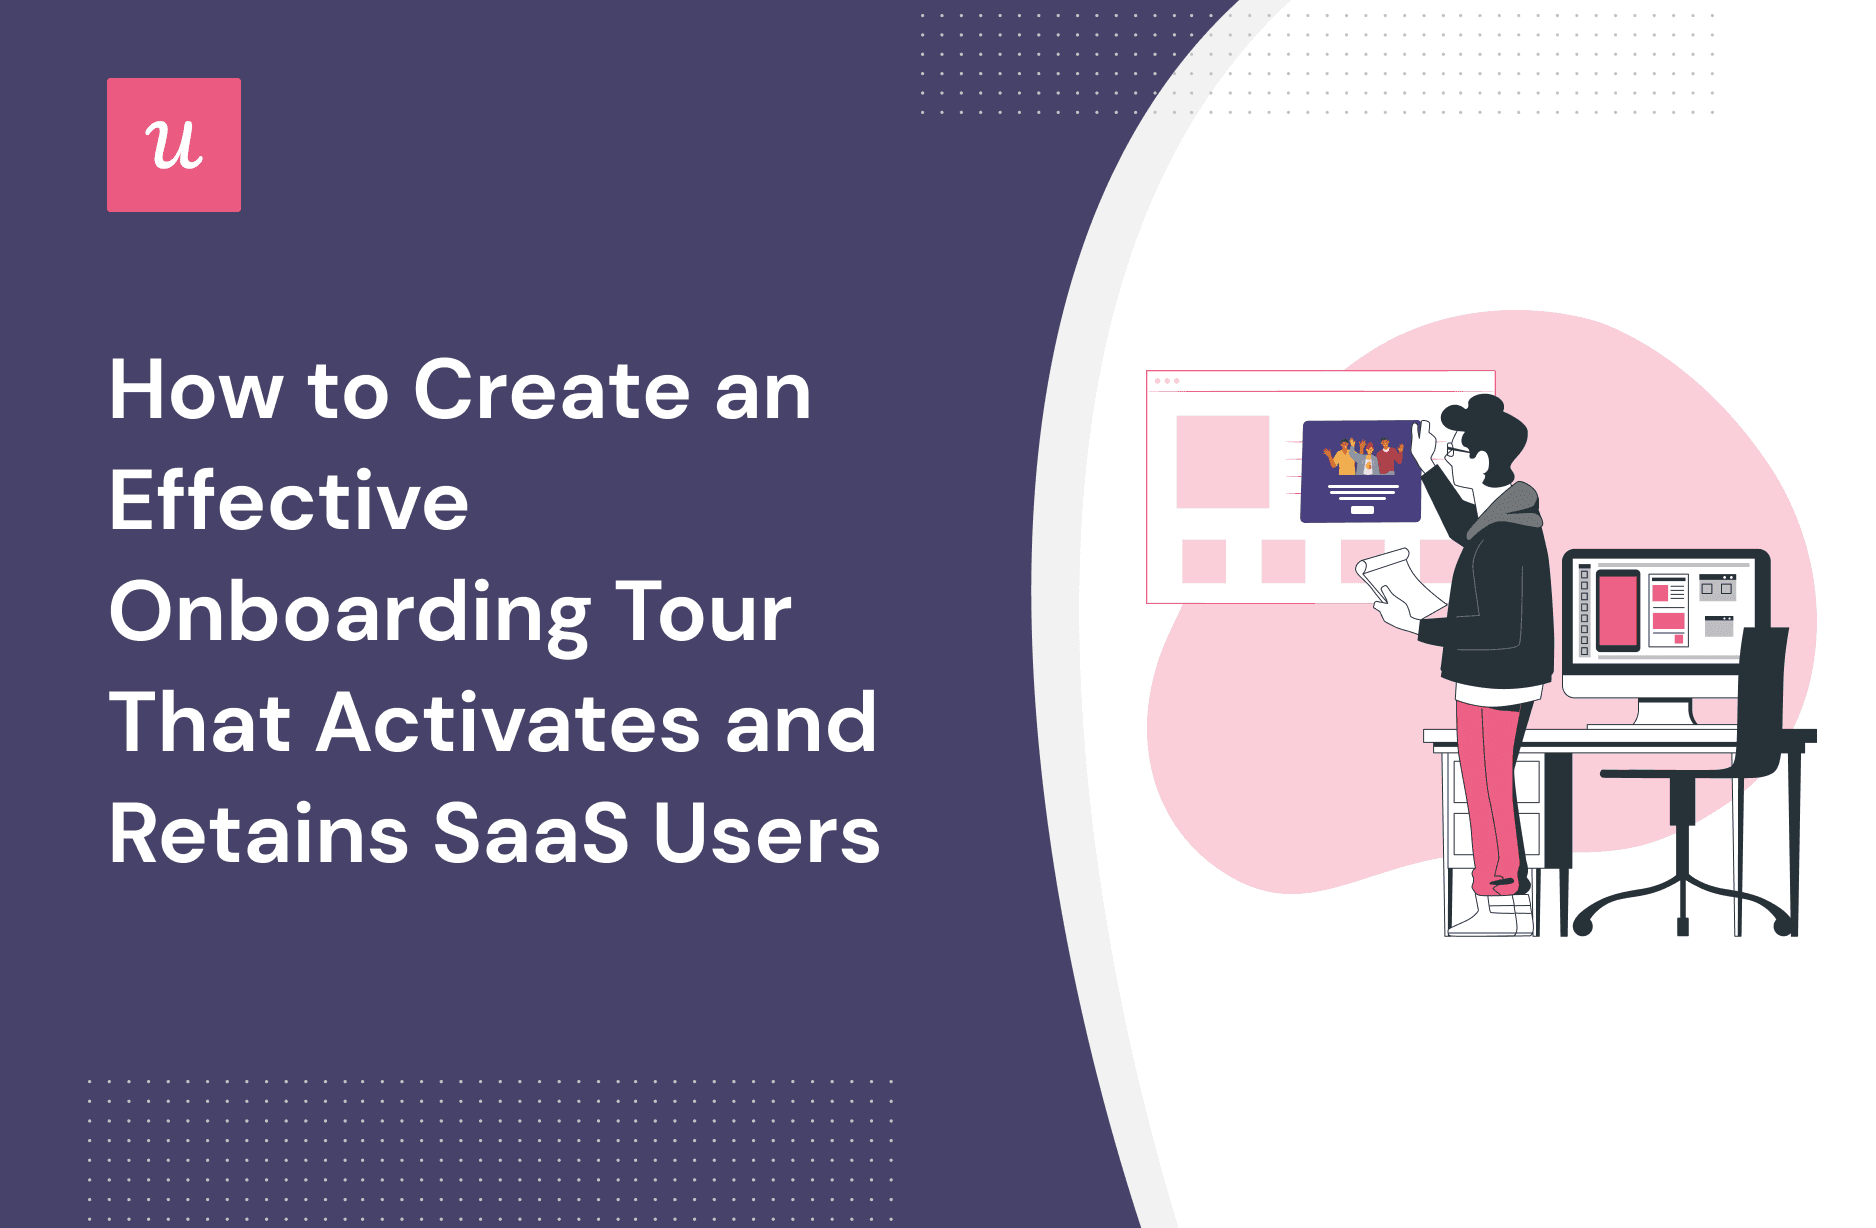 How to Create an Effective Onboarding Tour That Activates and Retains SaaS Users cover